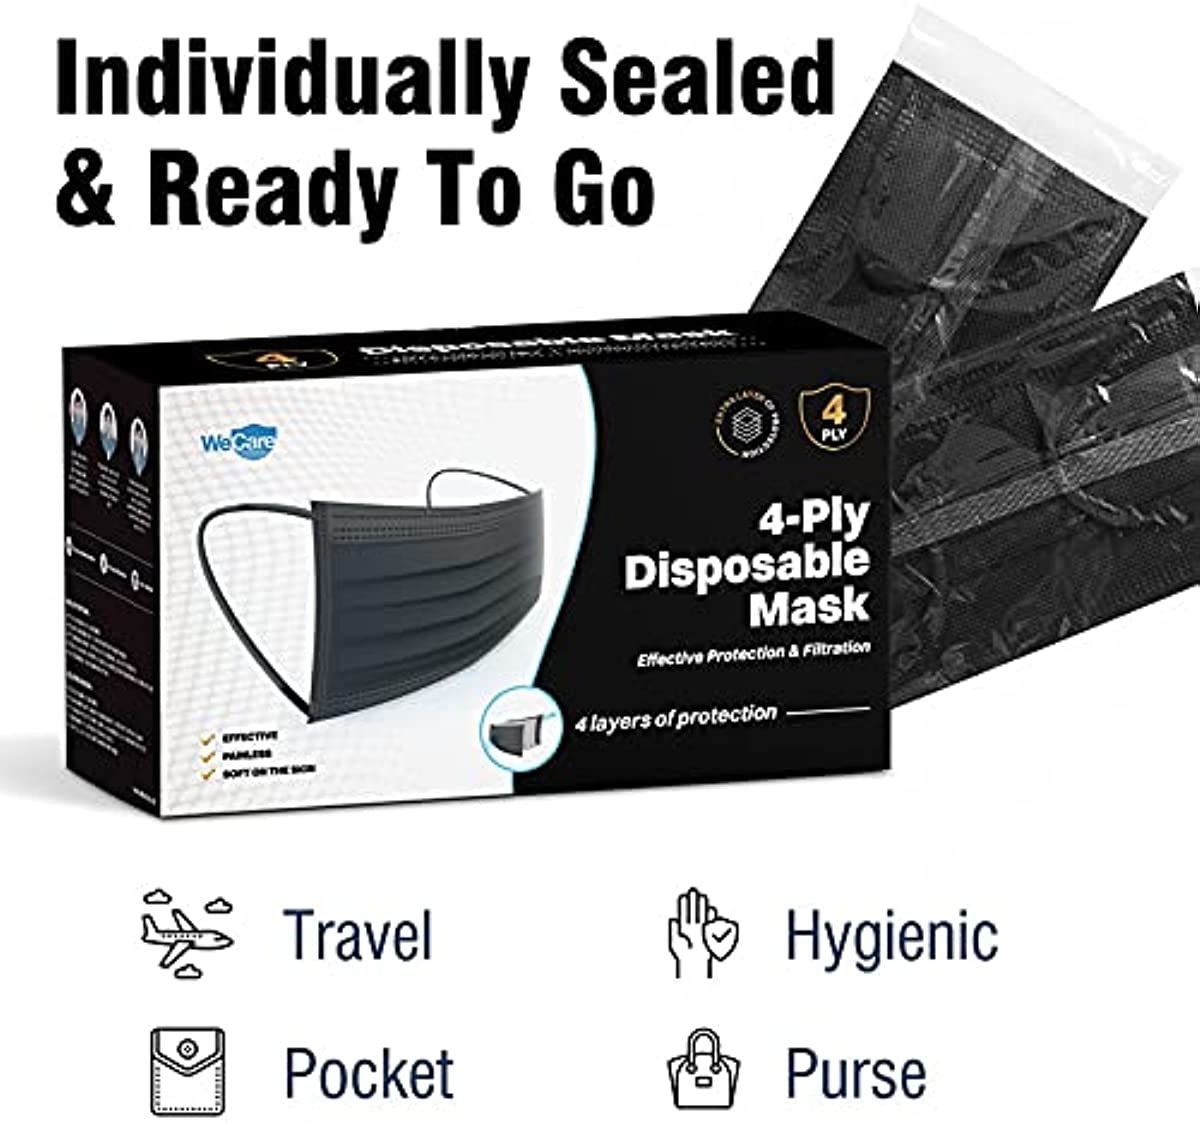 WECARE Disposable Face Mask Individually Wrapped - 50 Pack, Black 4 Ply Masks